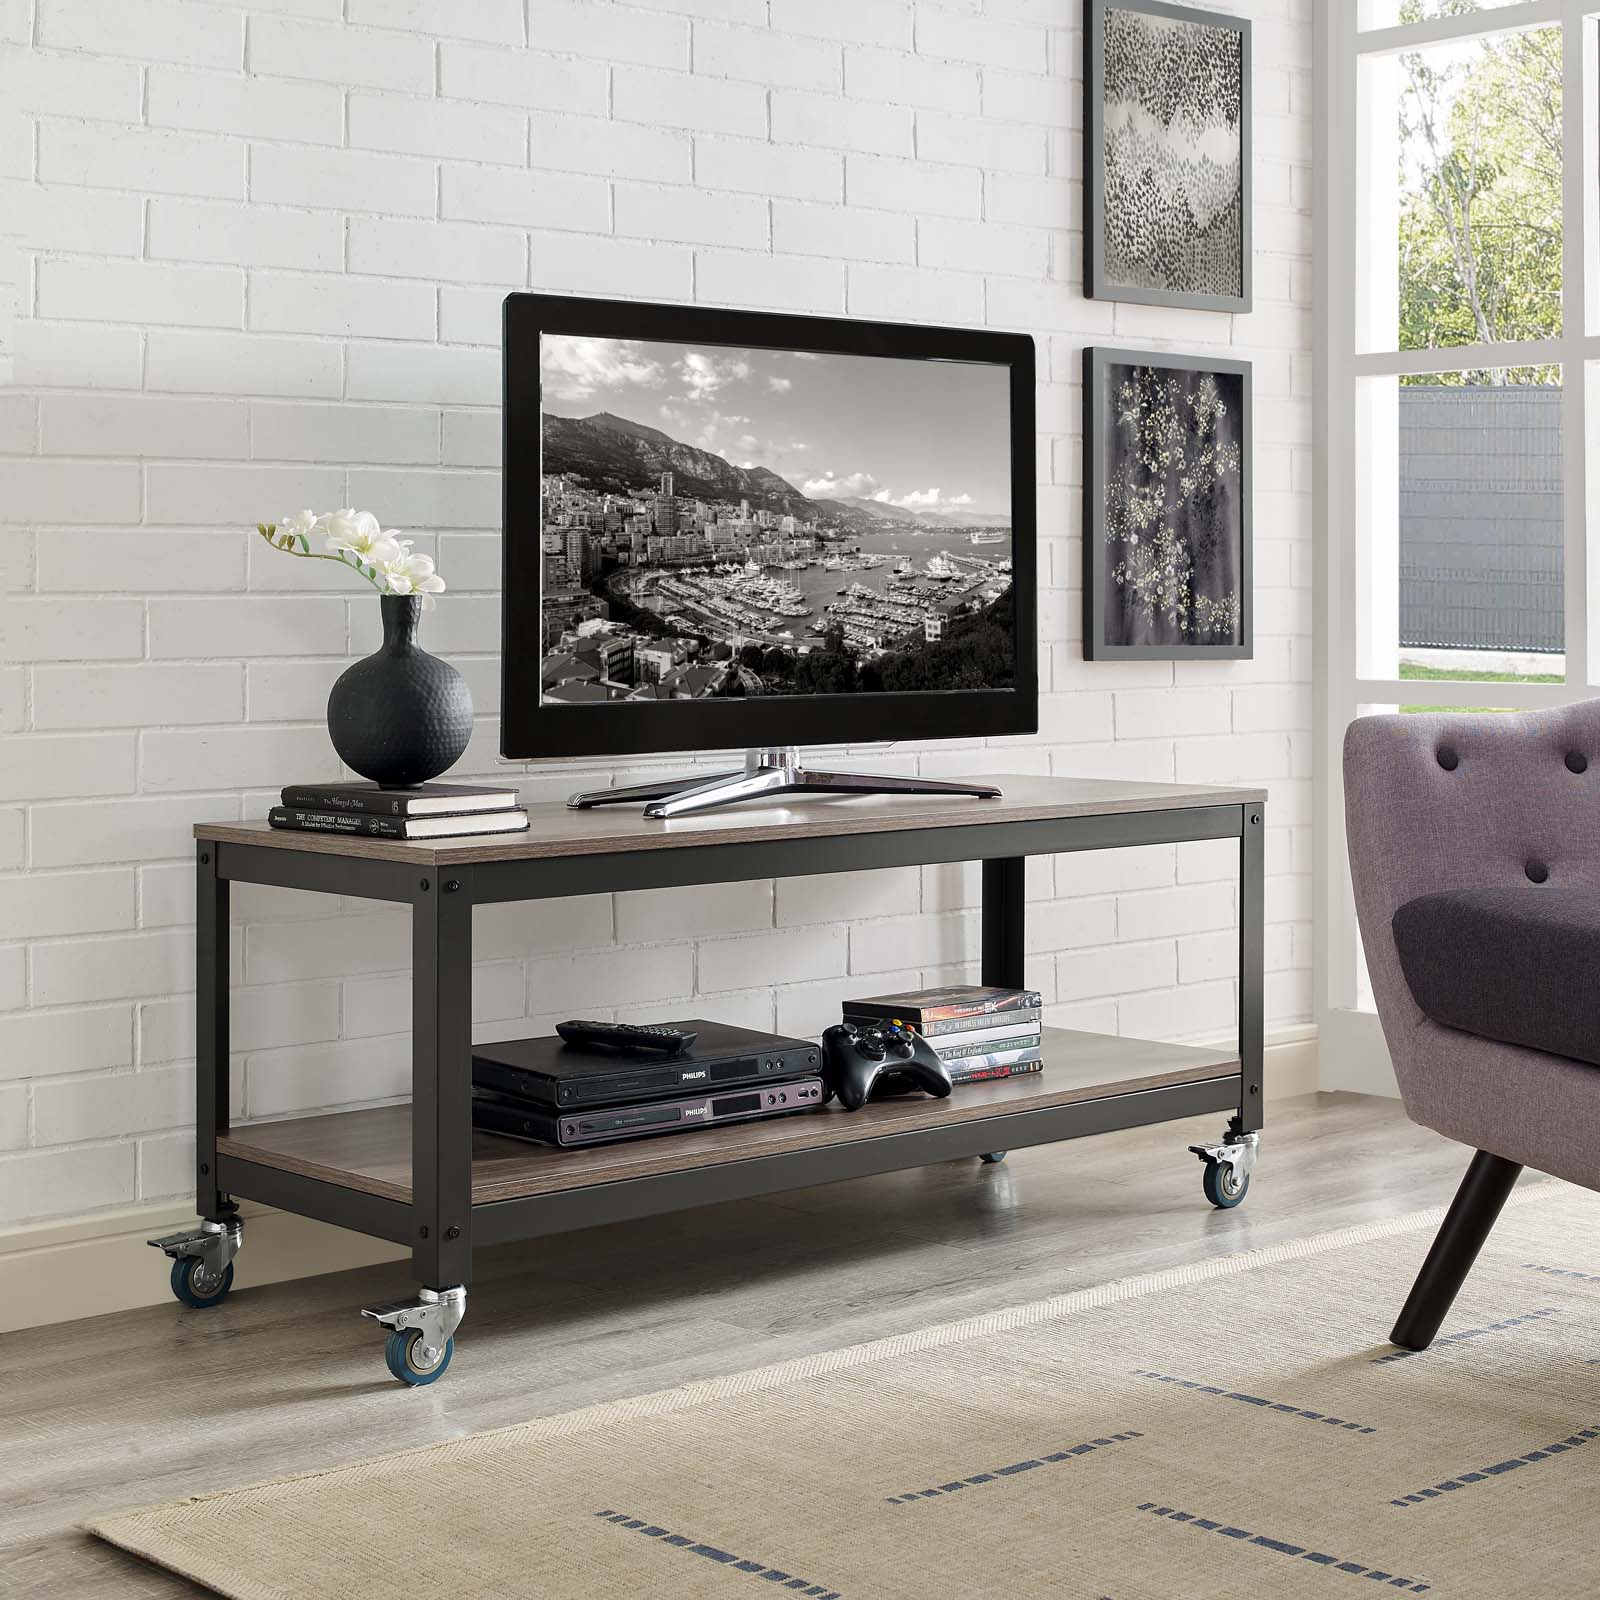 Vivify Tiered Serving or TV Stand - East Shore Modern Home Furnishings